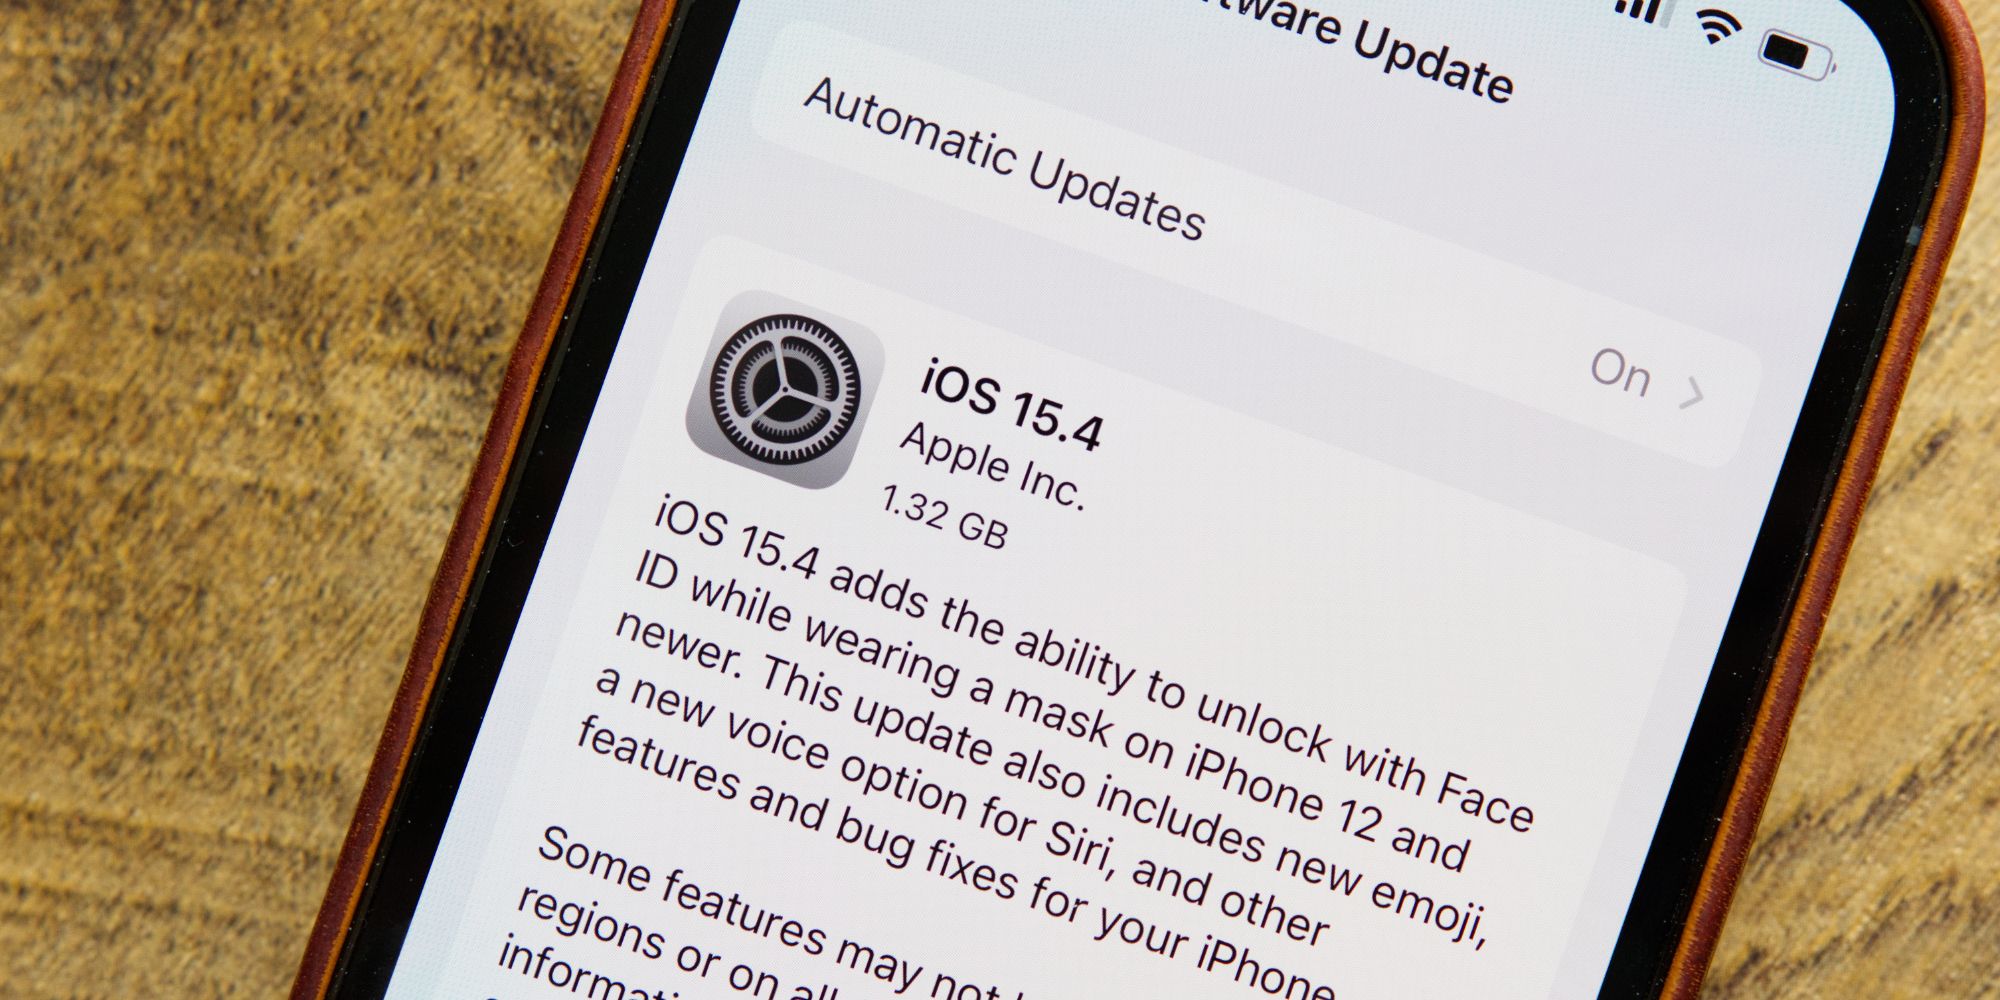 iOS 15.4 update on an iPhone